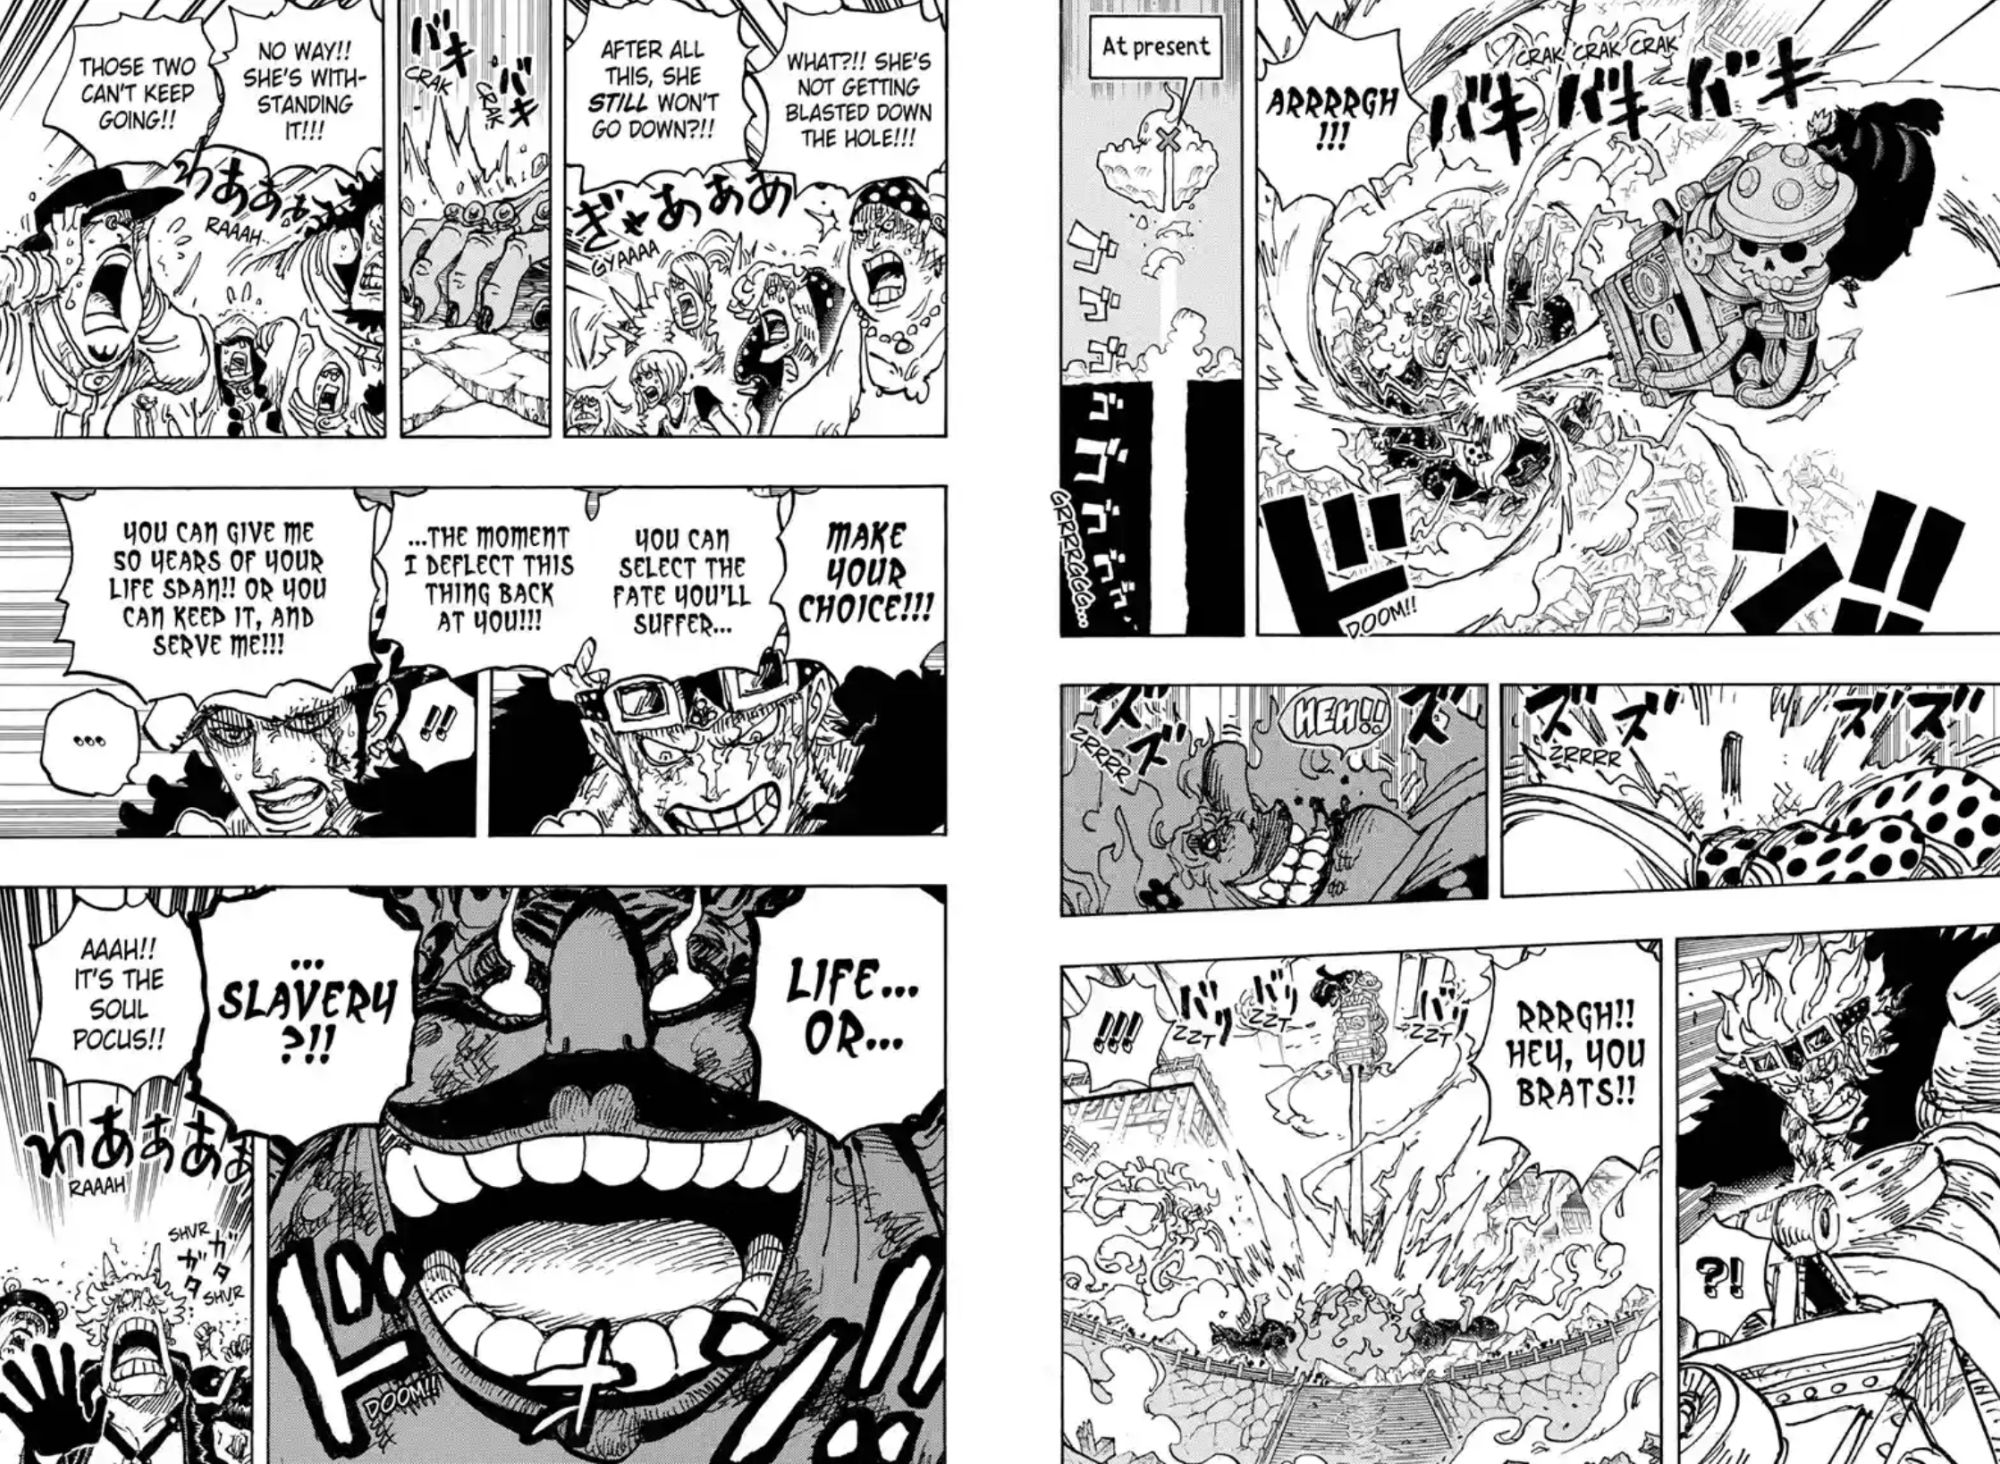 One Piece Chapter 1040: Big Mom defeated, a huge Zunesha reveal